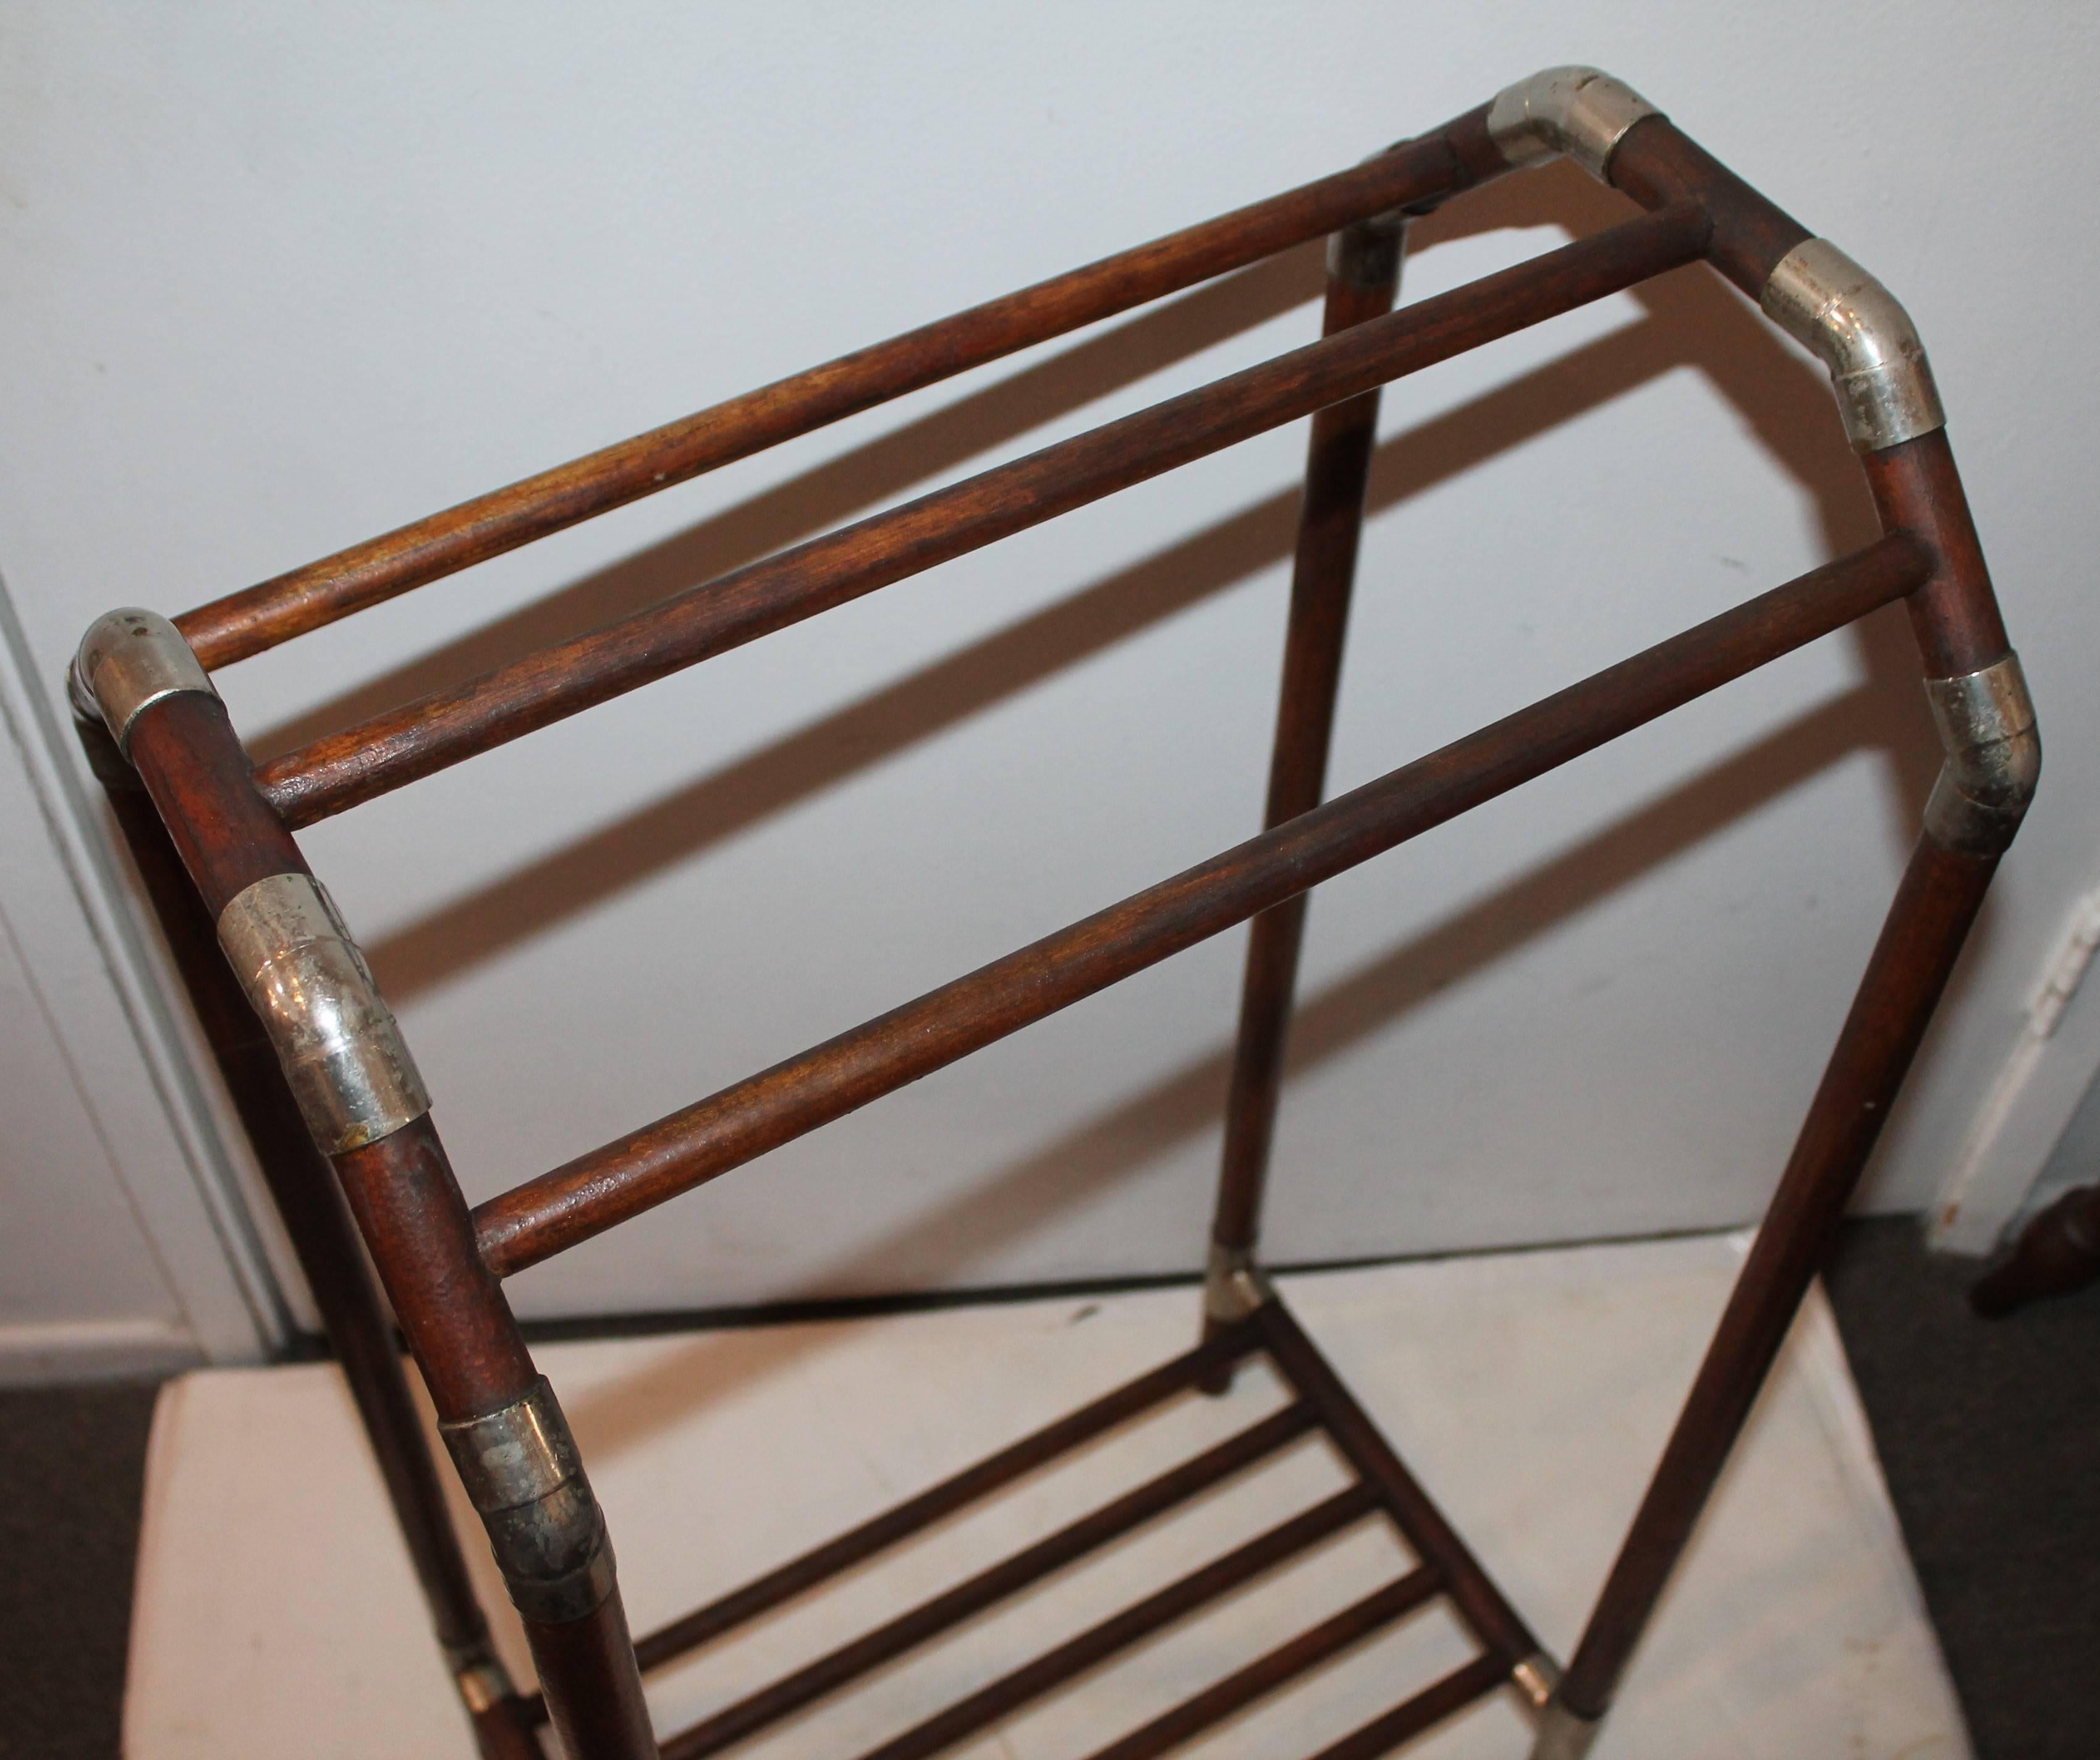 This fine bentwood luggage rack has nickel plated brass joints and is in great sturdy condition. This was from a train station. Great for hanging heavy textiles like Navajo weaving's.